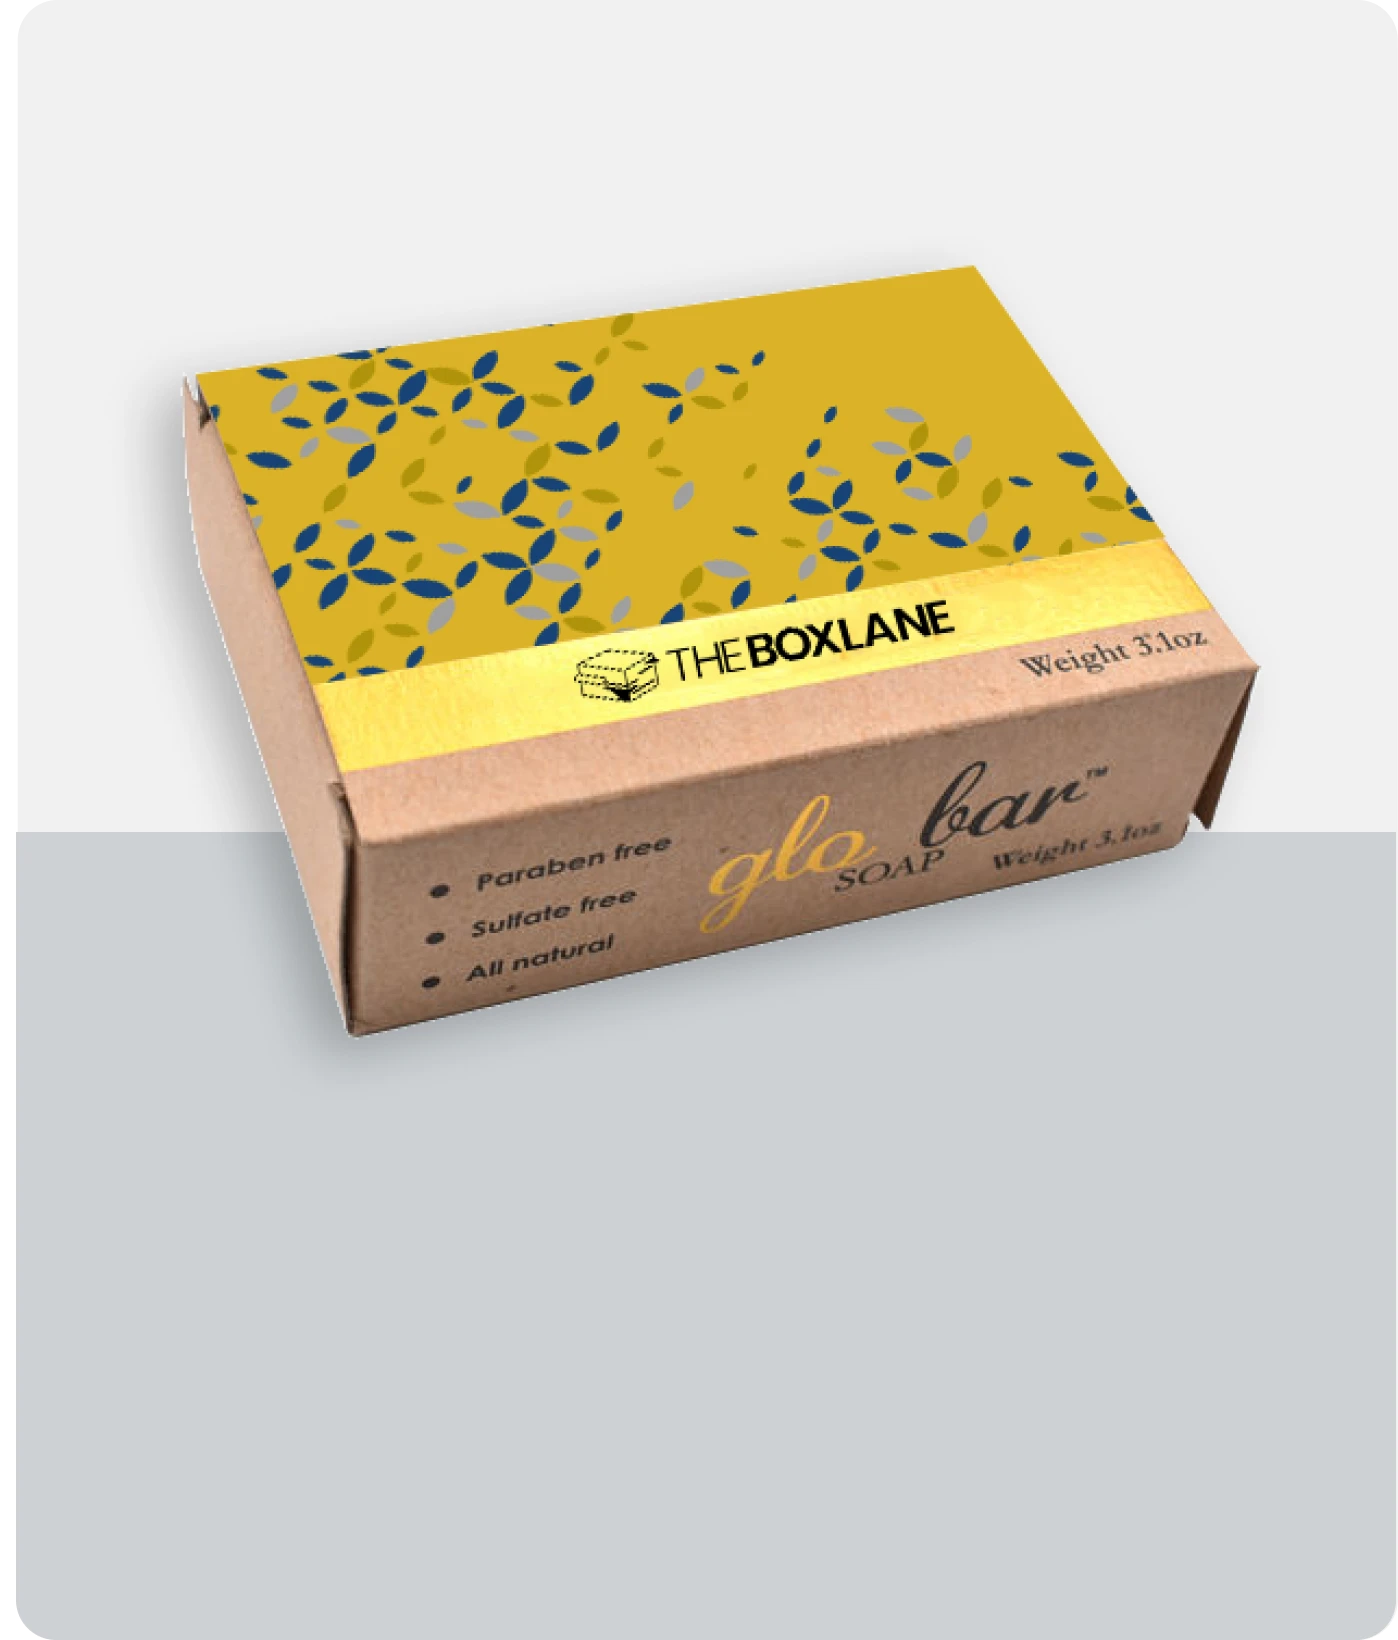 Soap Bar Boxes related products image | The Box Lane